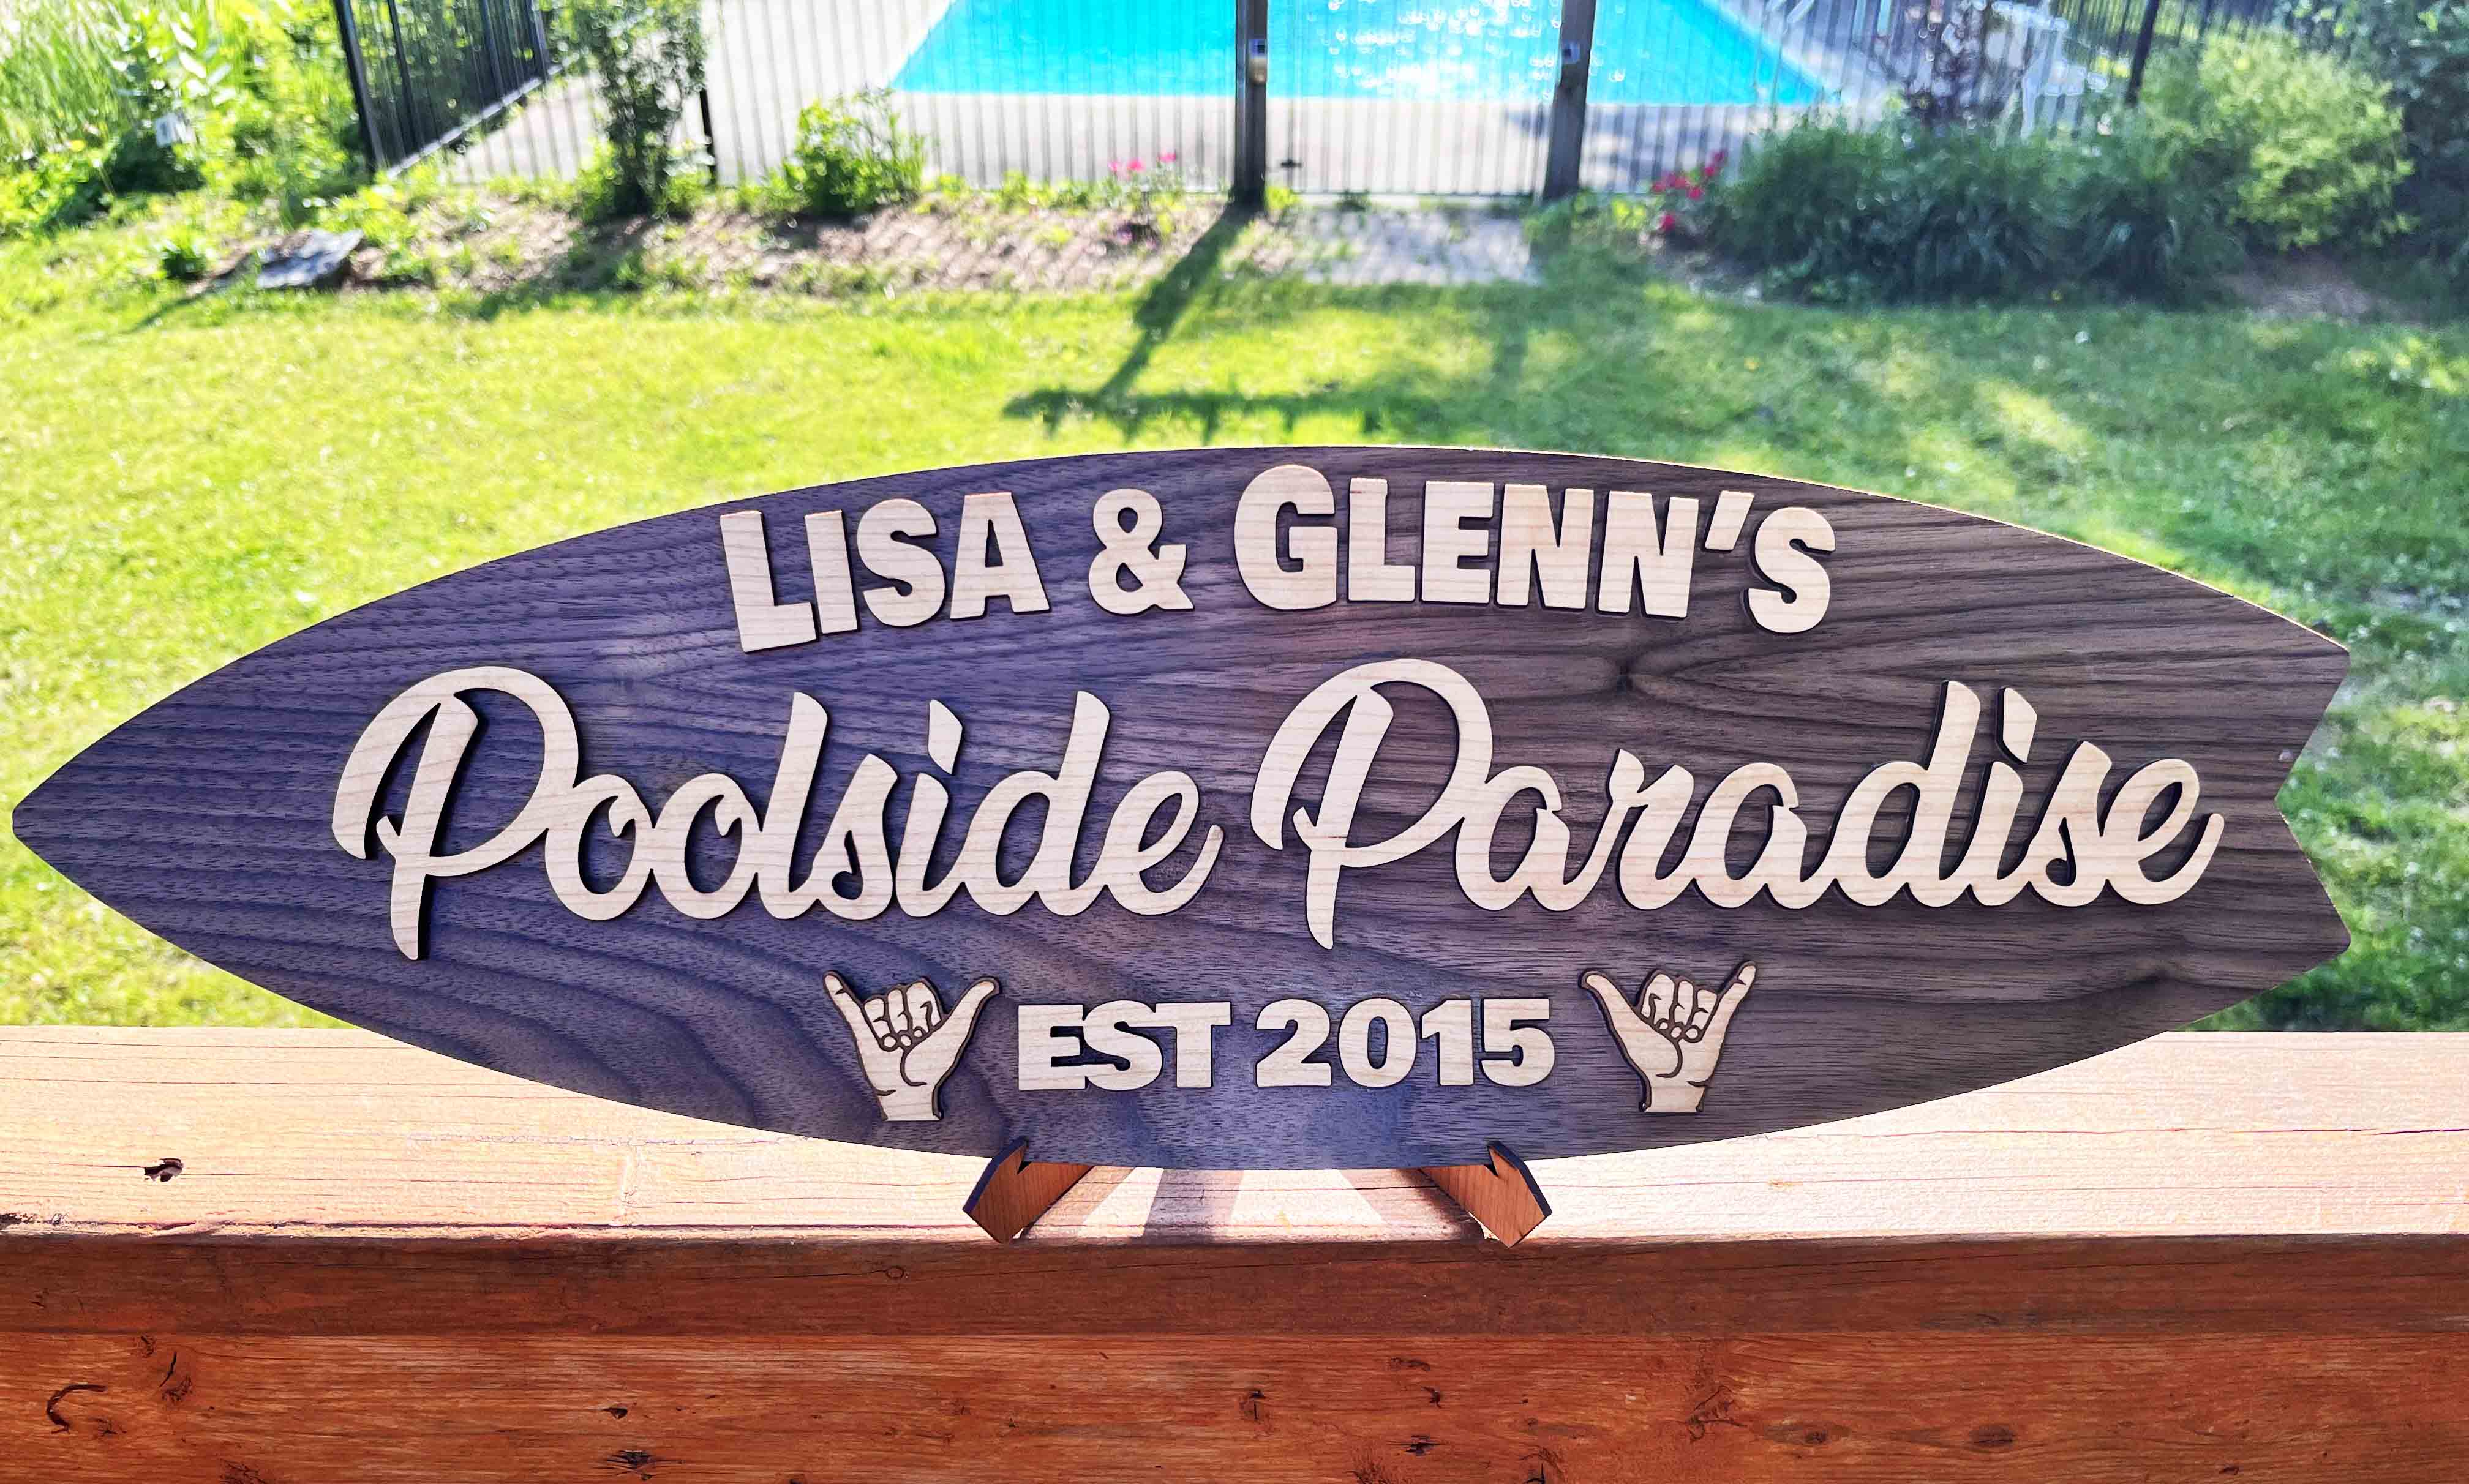 Surfboard Poolside Paradise Sign.